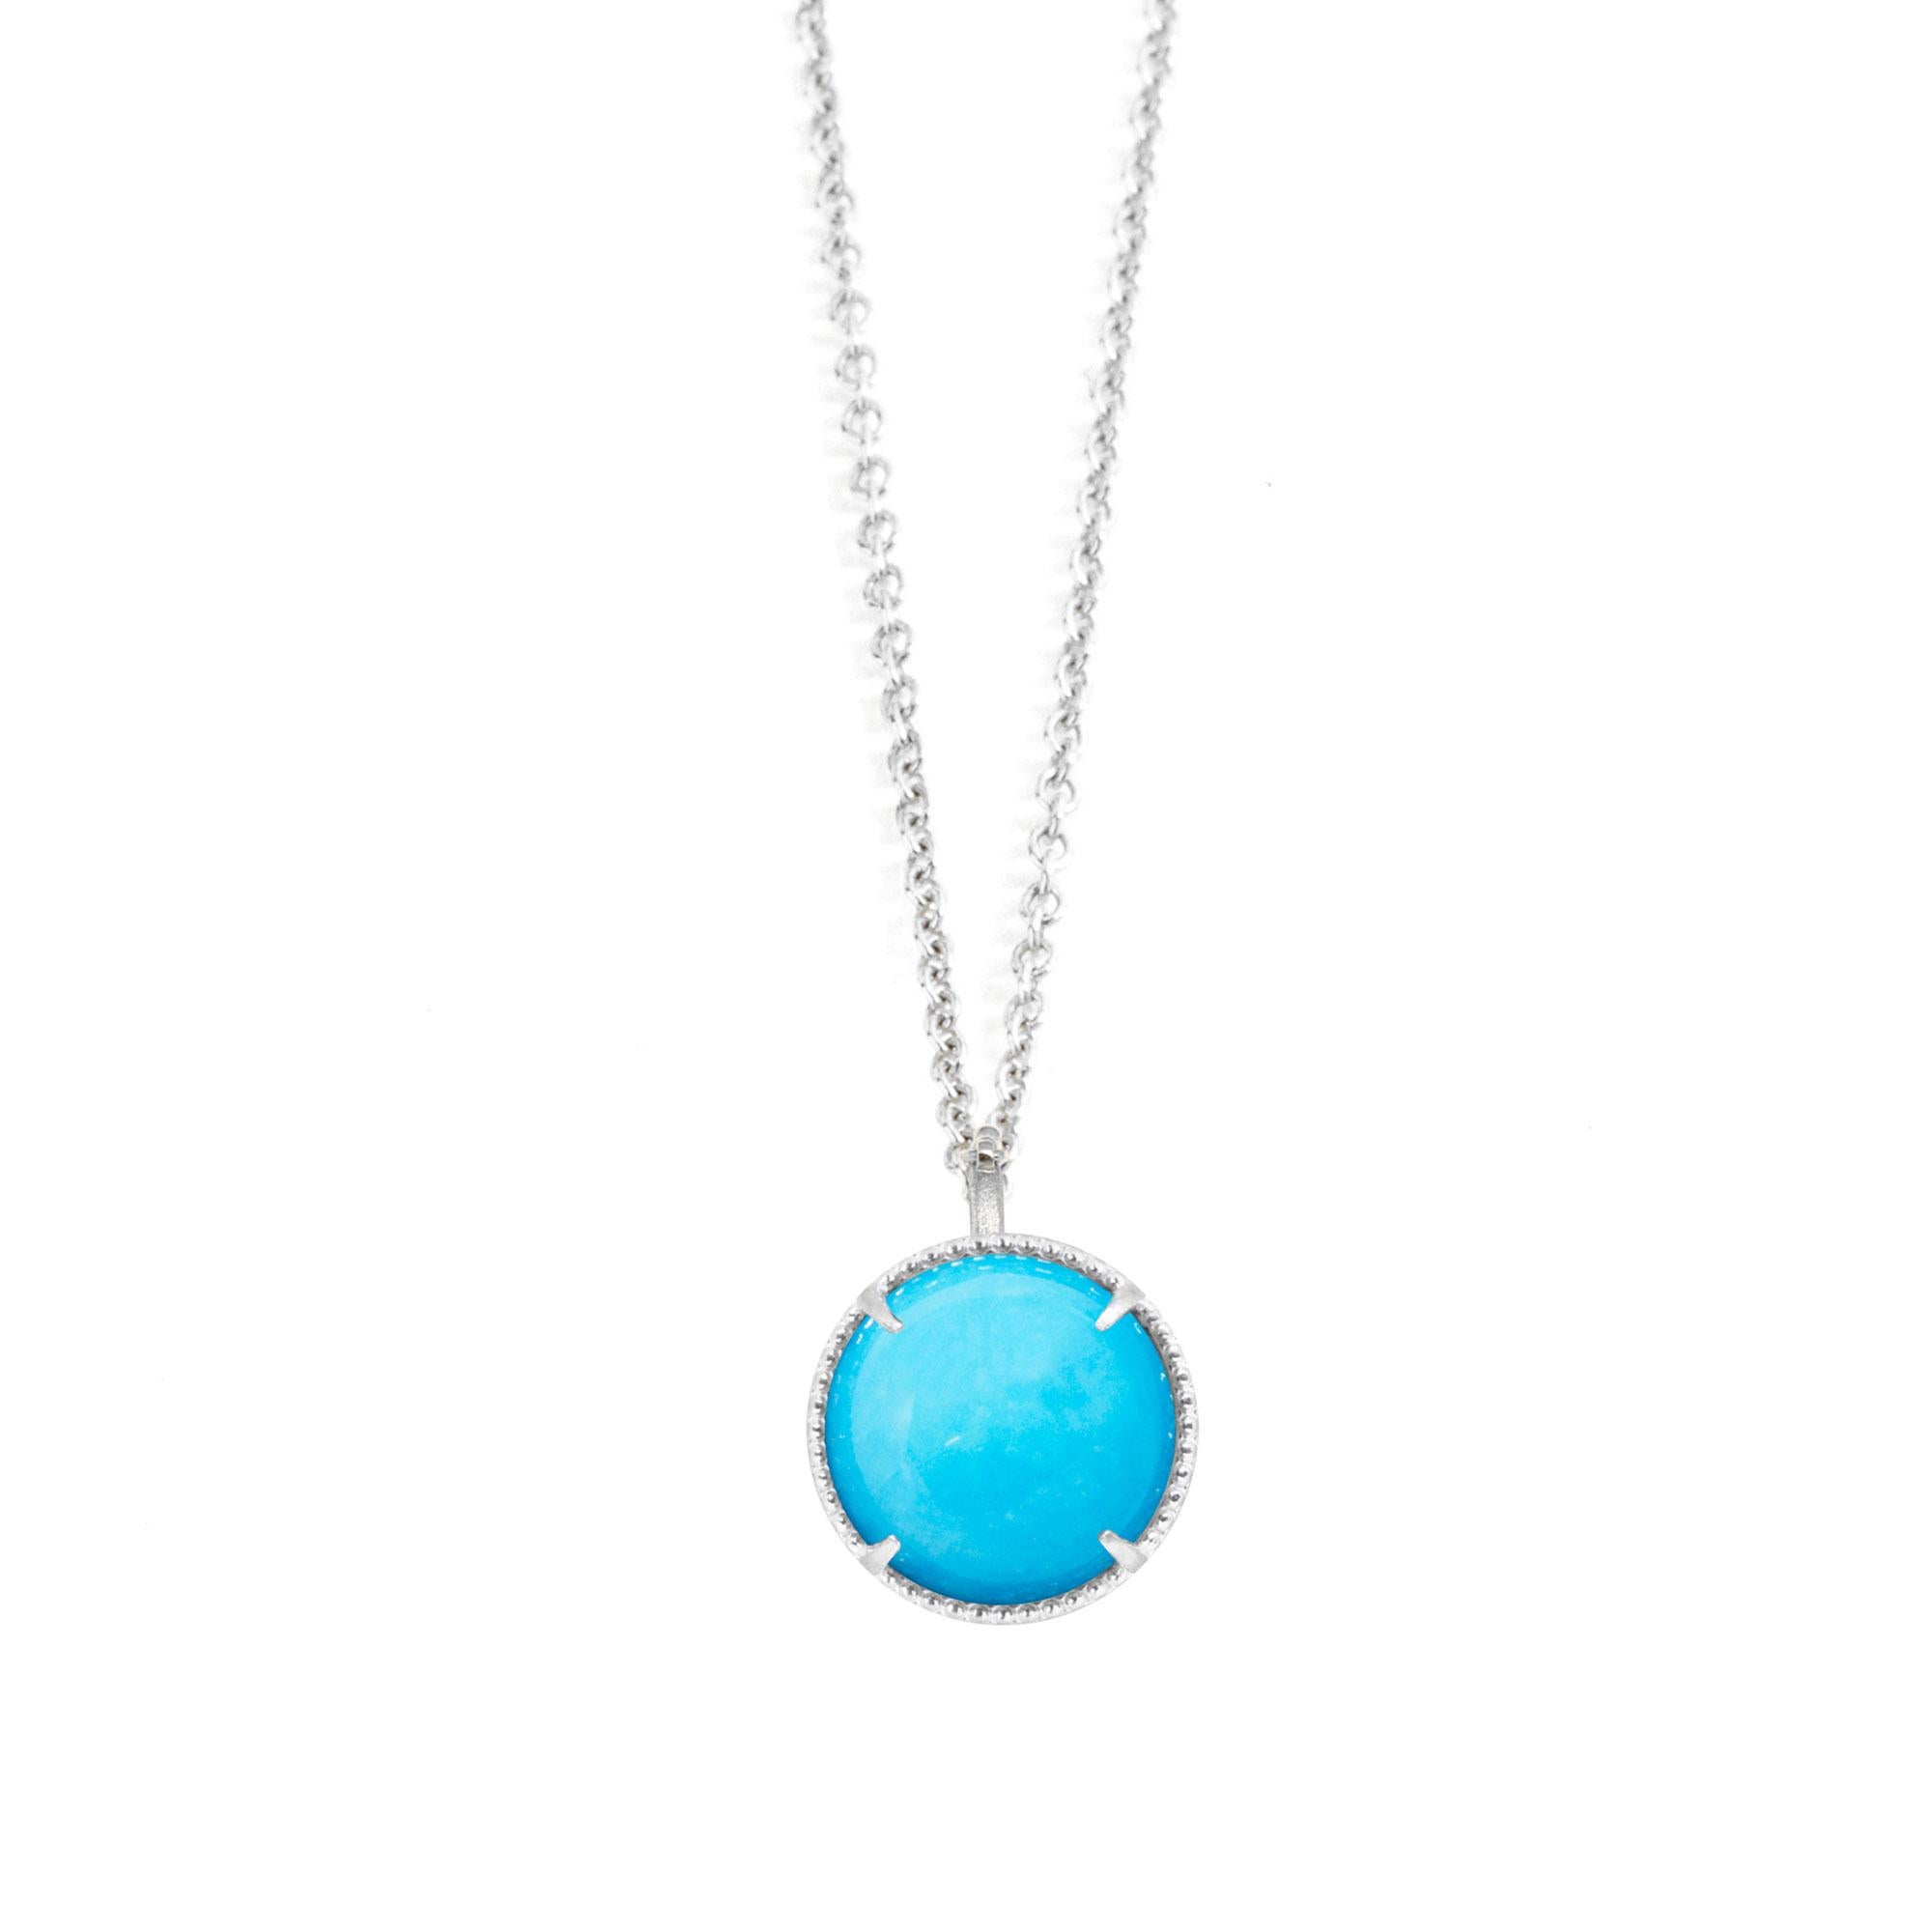 Details
Metal: Sterling Silver
Stone carat: 1
Length: 15-17''
Stone size: 7mm

About the stones:
Genuine Sleeping Beauty: Turquoise is an opaque blue-to-green mineral, technically a hydrated phosphate of copper and aluminum. It is available in